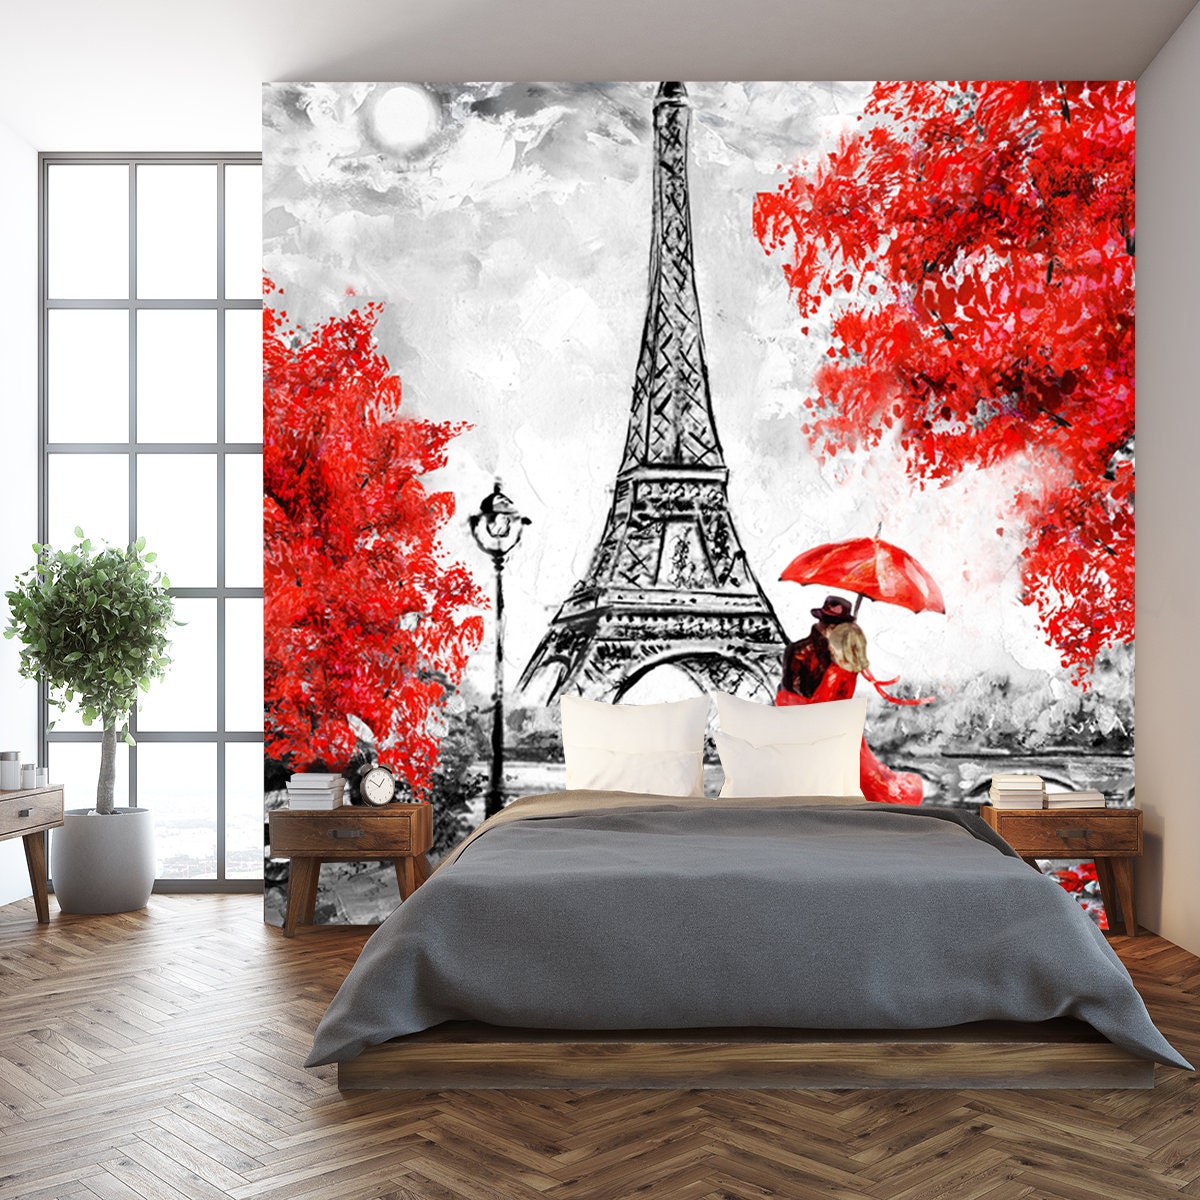 Oil Painting, Paris, European City Landscape, Eiffel Tower, Black, White and Red Wallpaper Bedroom Mural